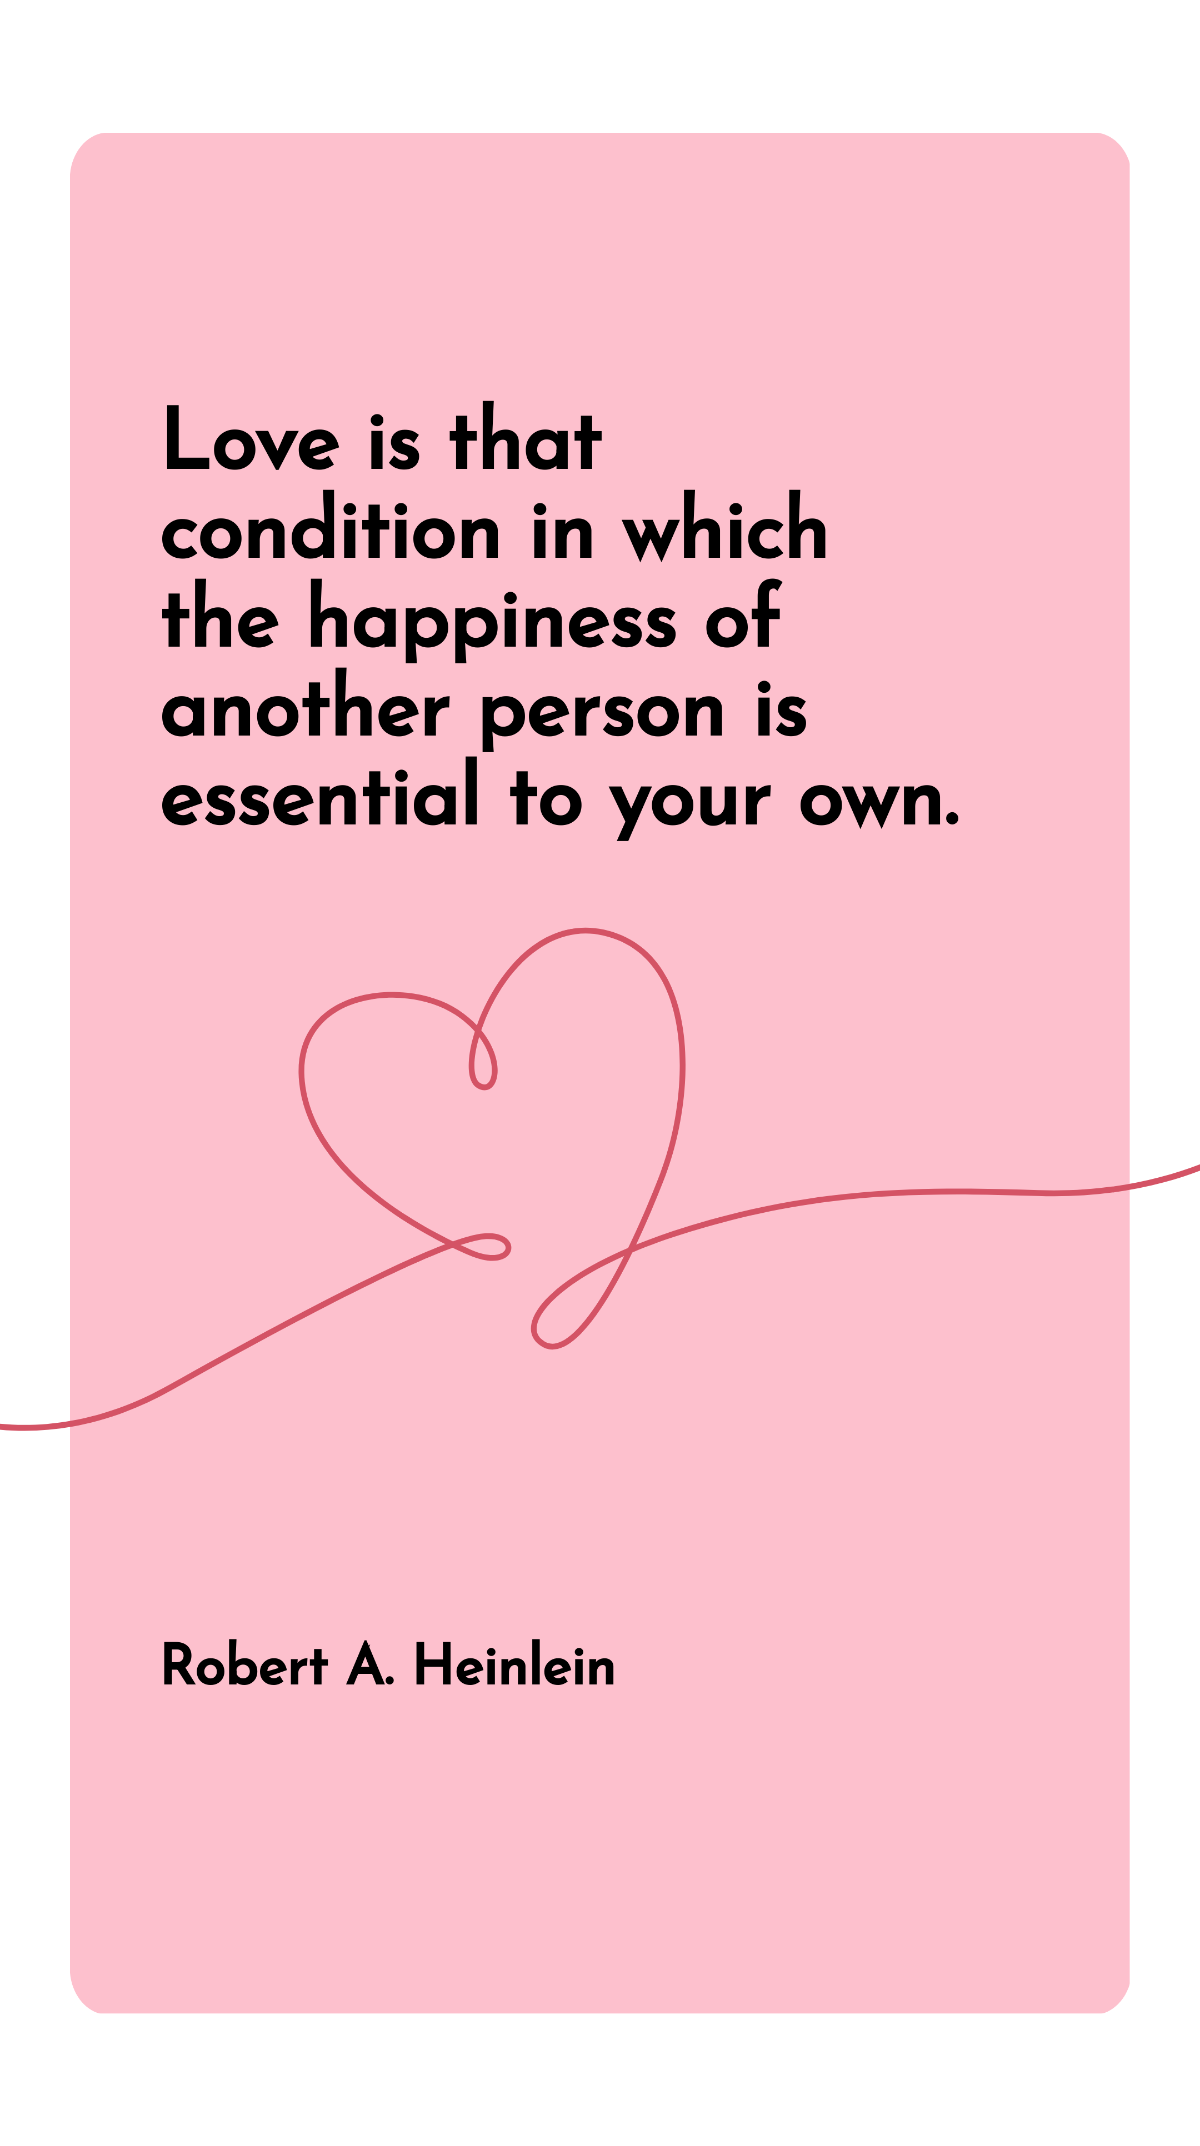 Robert A. Heinlein - “Love is that condition in which the happiness of another person is essential to your own.” Template